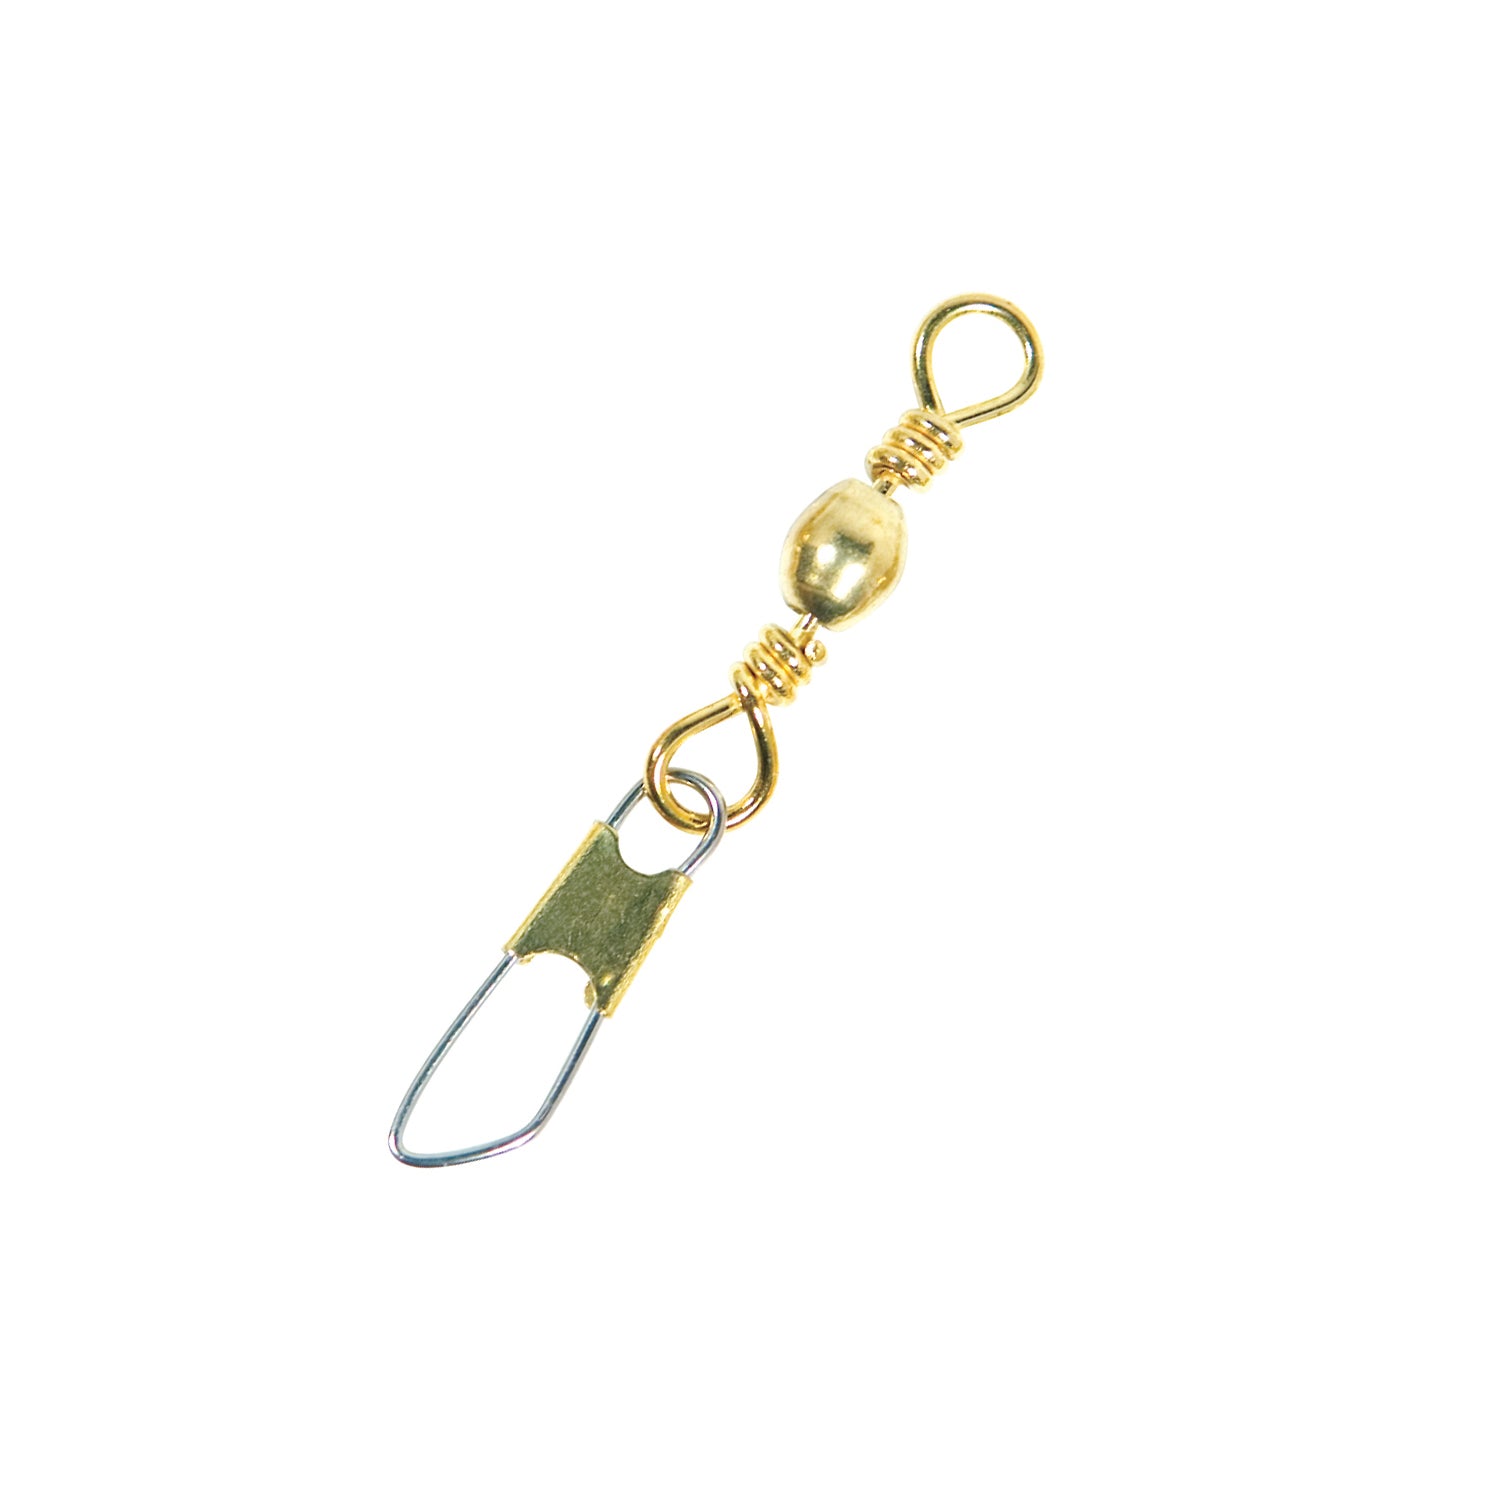 Fishing Barrel Swivel with Double Safety Snaps Brass Fishing